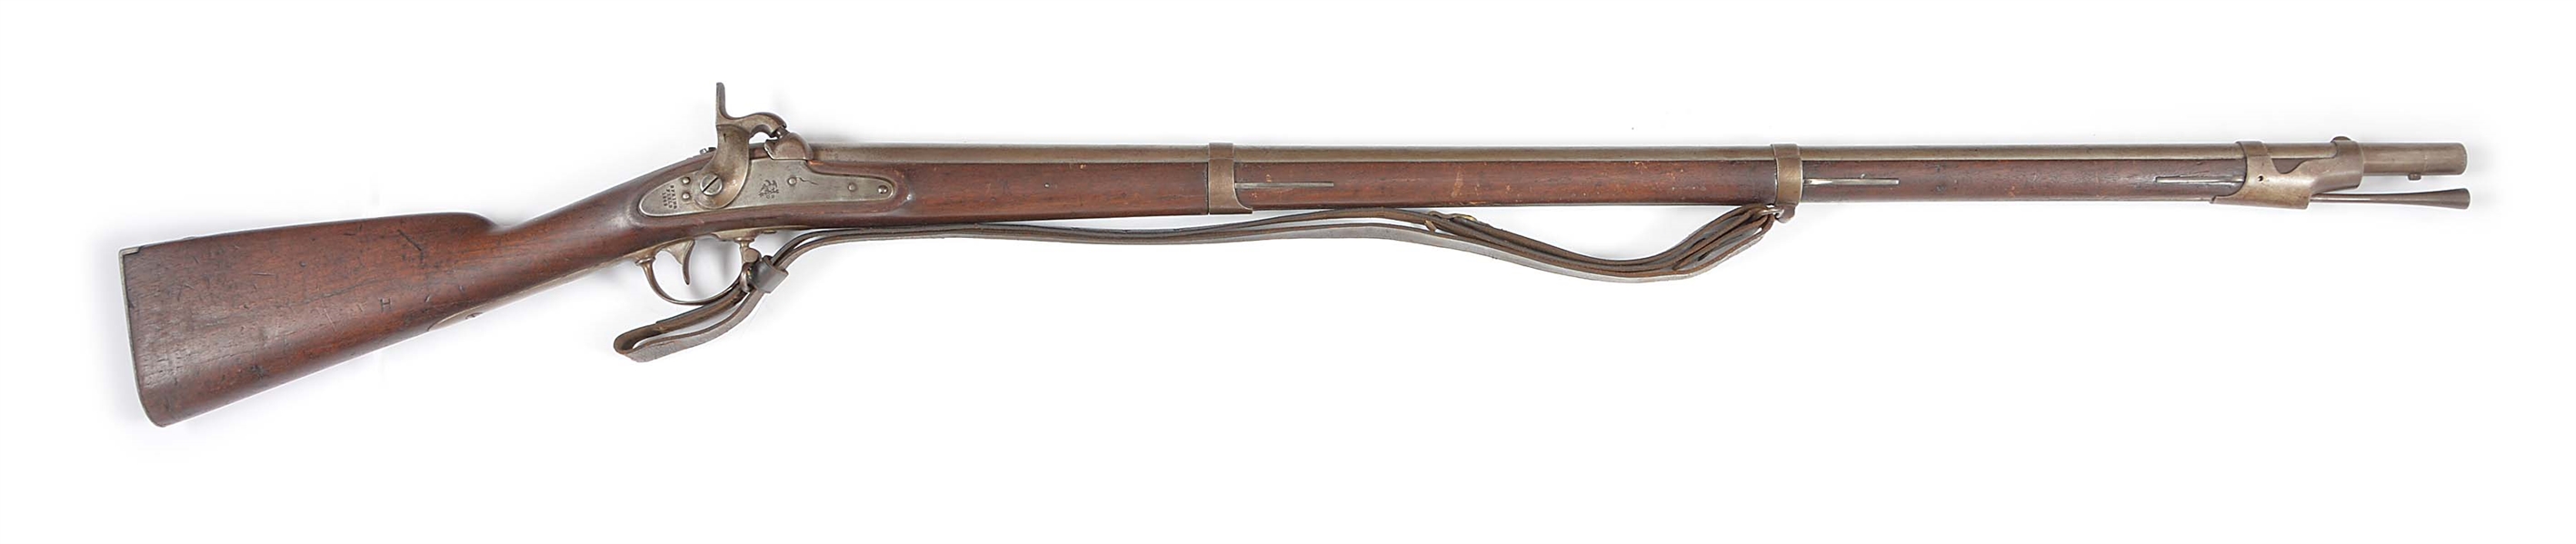 (A) SPRINGFIELD 1842 PERCUSSION MILITARY RIFLE.